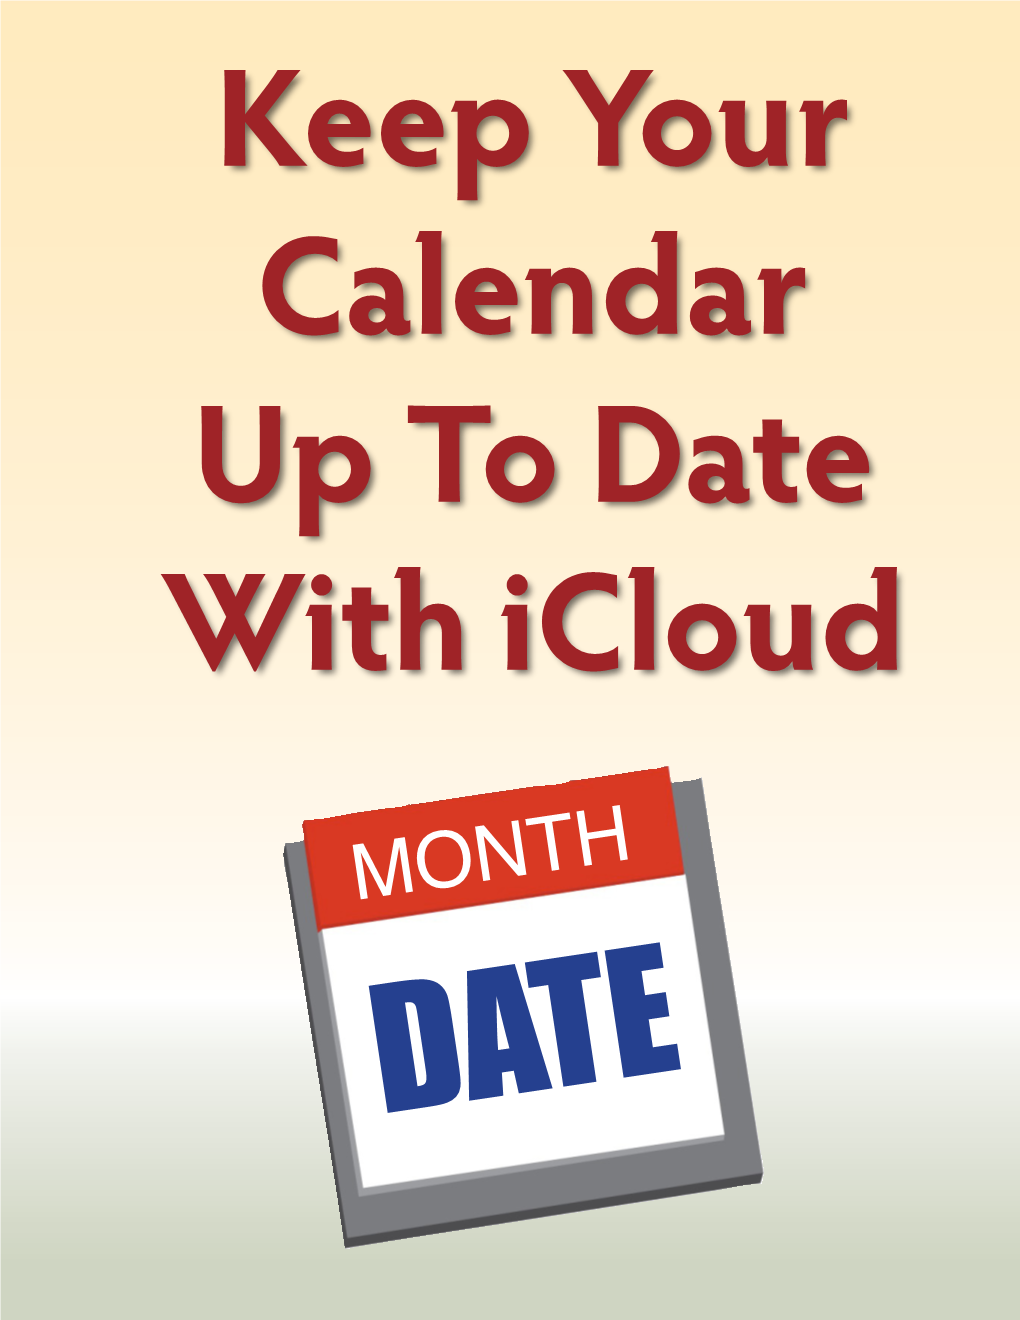 Keep Your Calendar up to Date with Icloud